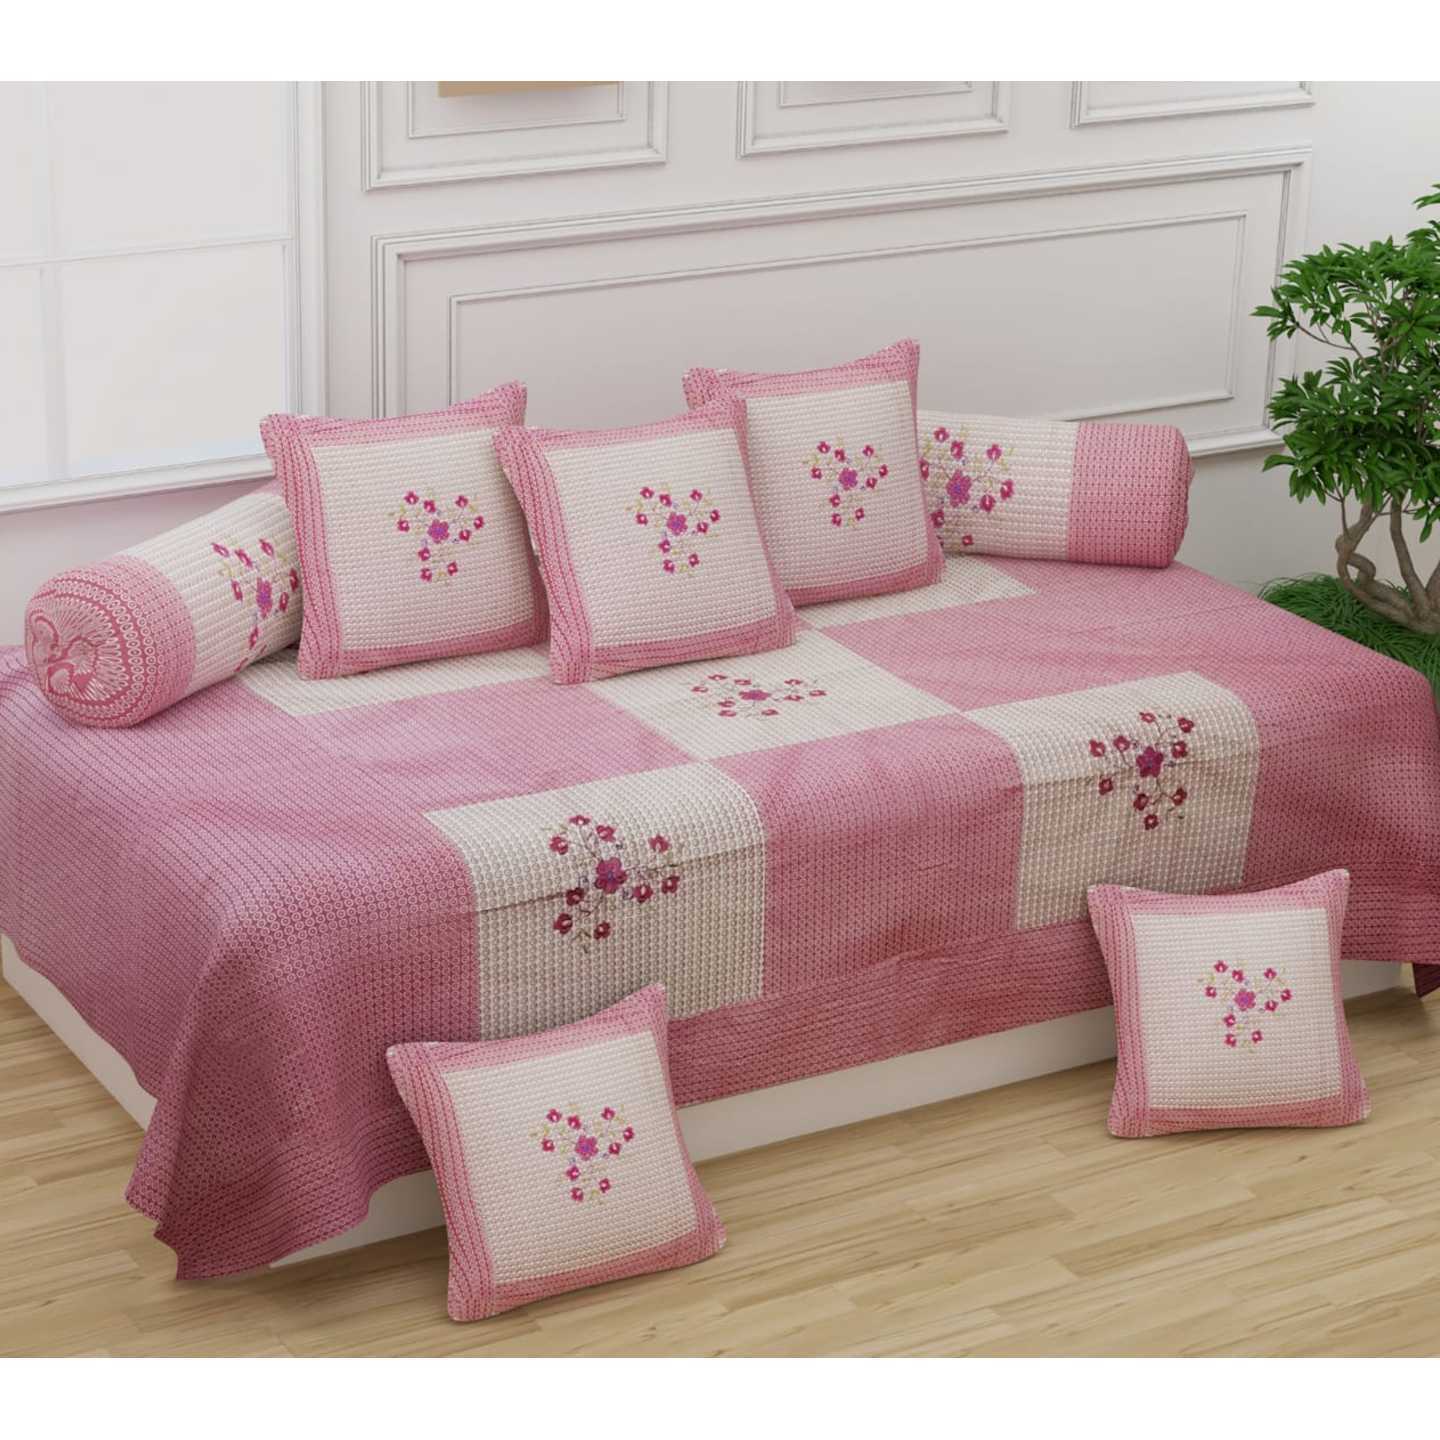 Handtex Home Cotton Fabric Embroidery Design Diwan Set Covers 8 Pcs Set of 1 Bedsheet 2 Bolsters and 5 Cushion Covers (Peach)